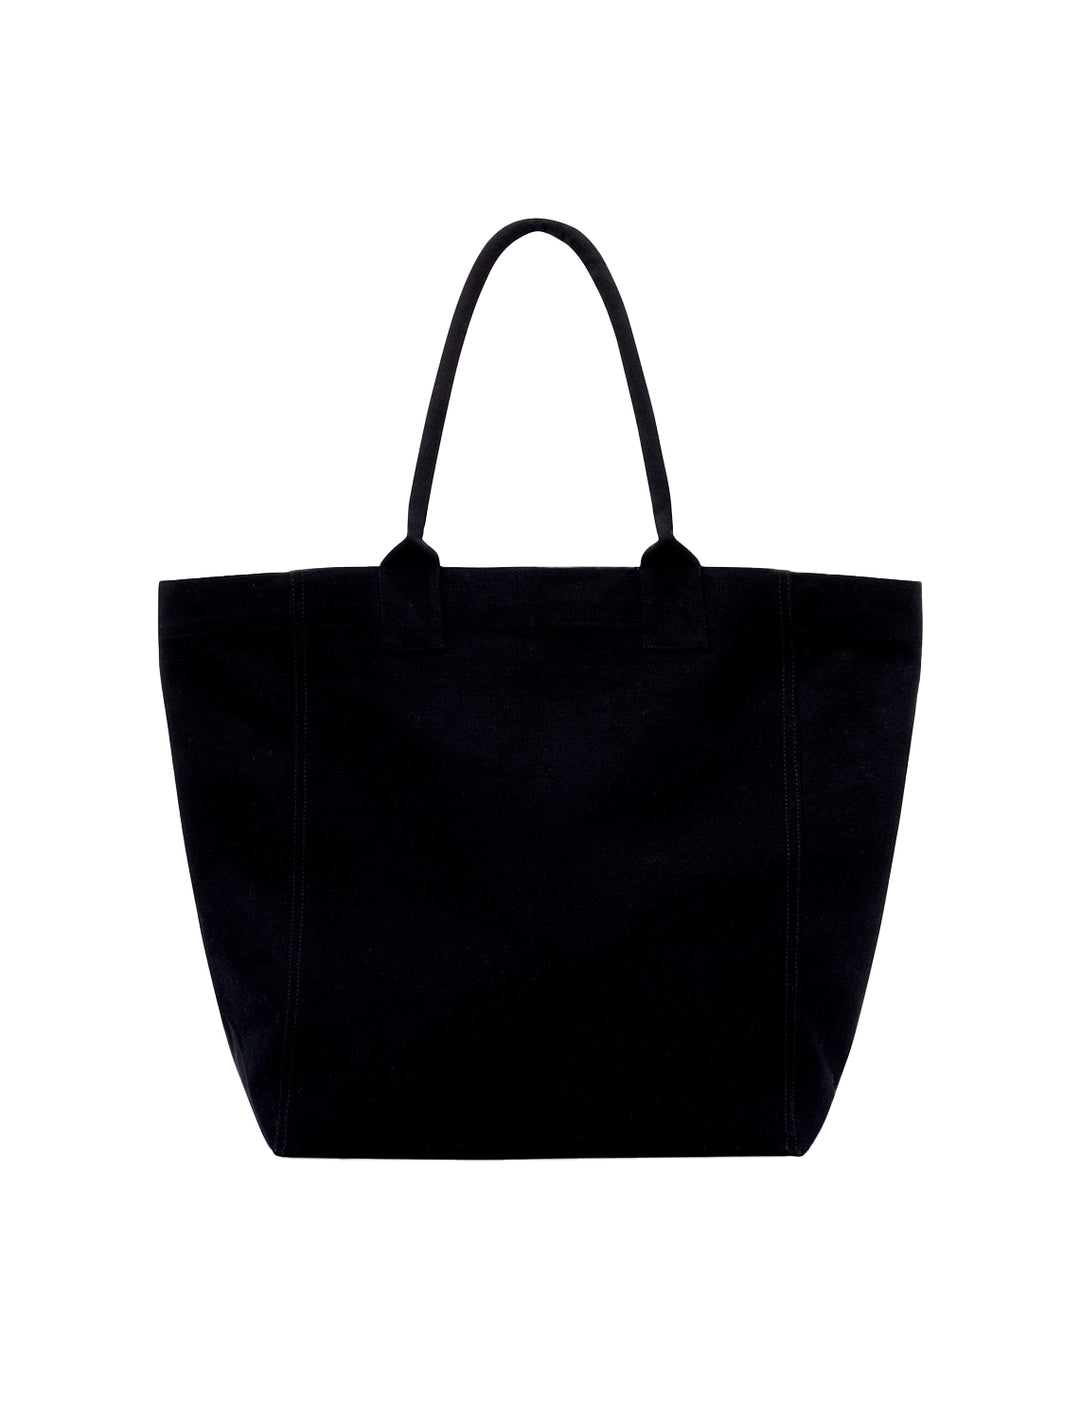 Back view of Isabel Marant Etoile's Yenky Canvas Tote in Black with Sparkle Logo.